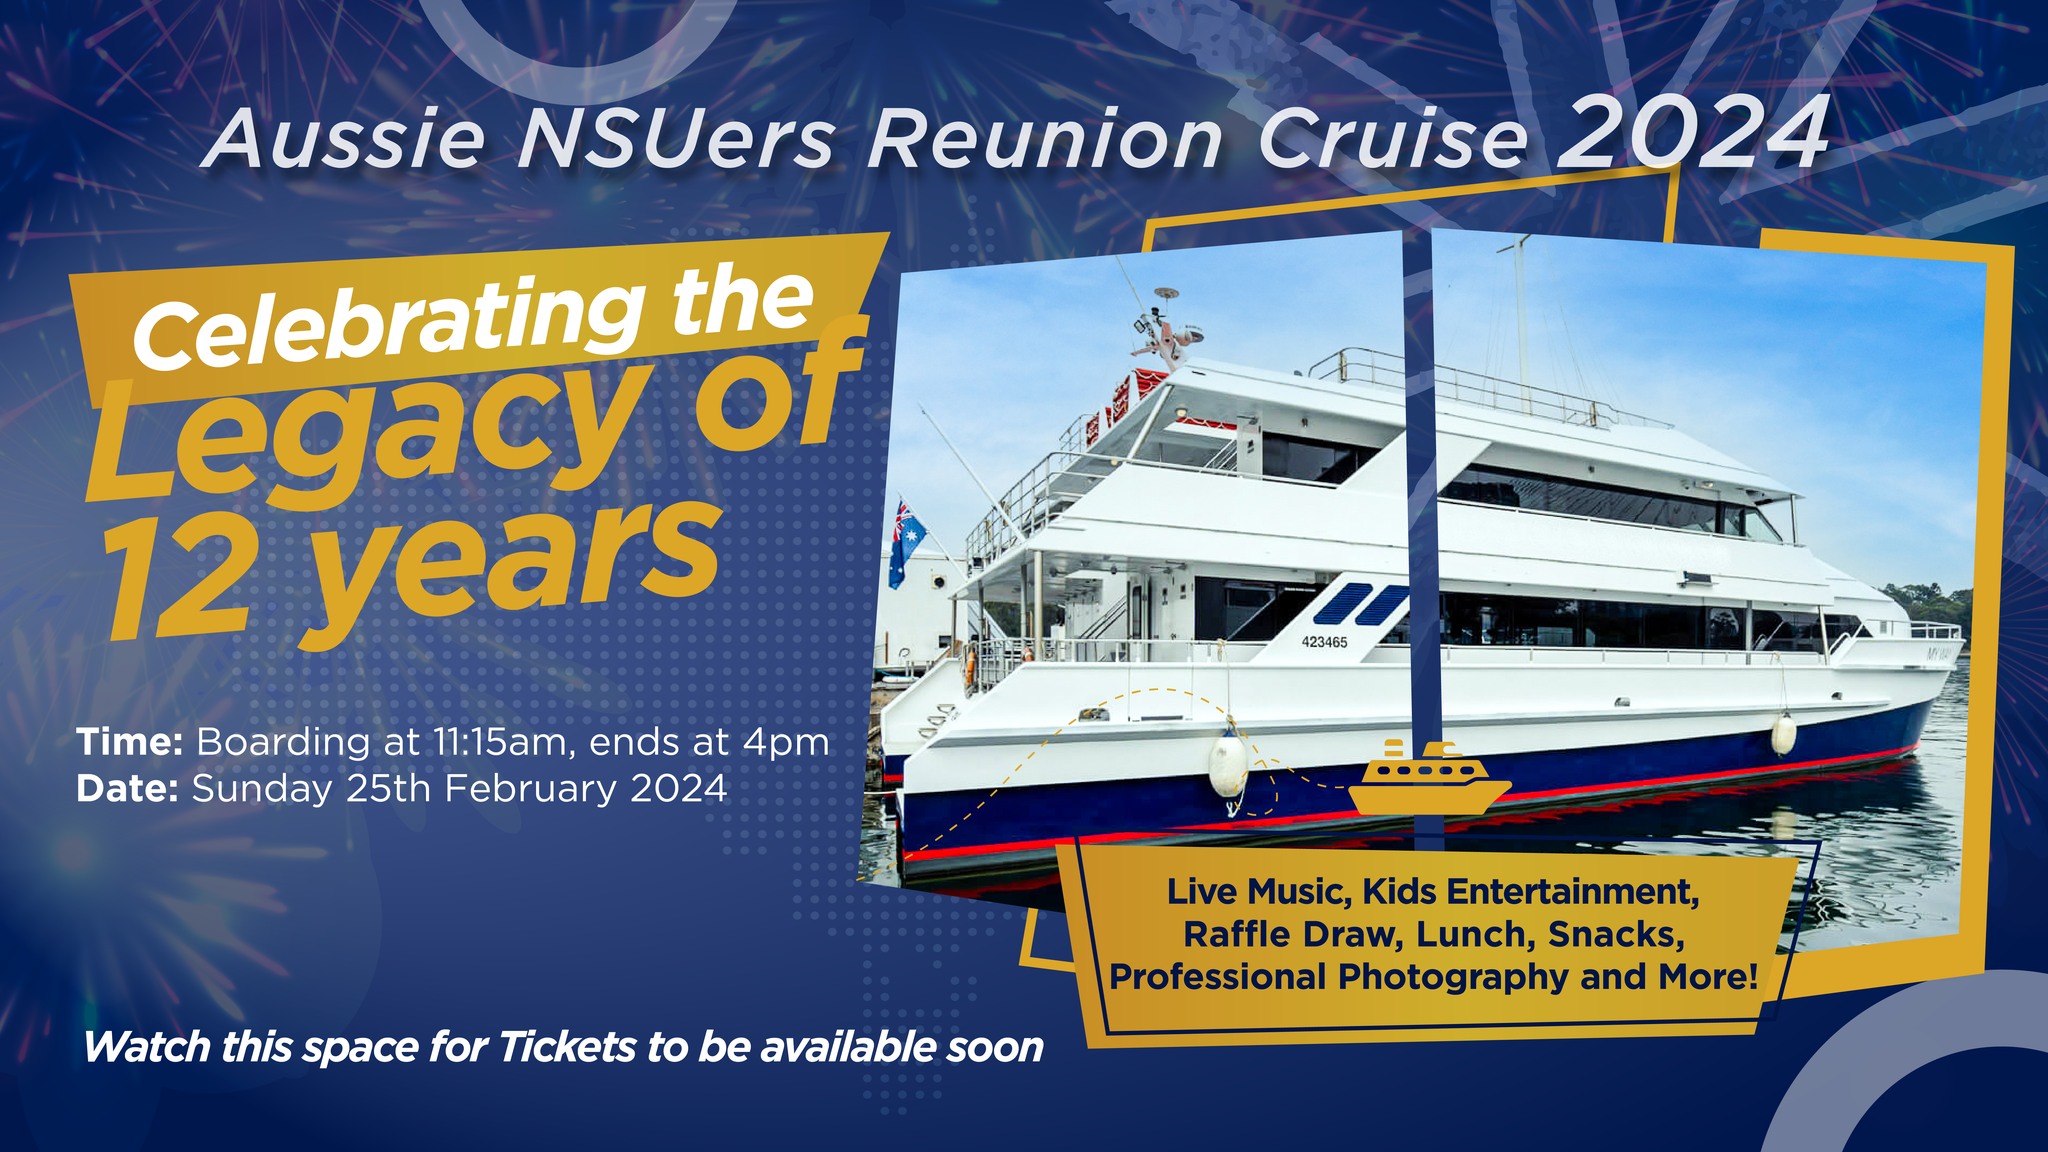 Aussie NSUers Reunion Cruise 2024 -  celebrating the legacy of 12 years!